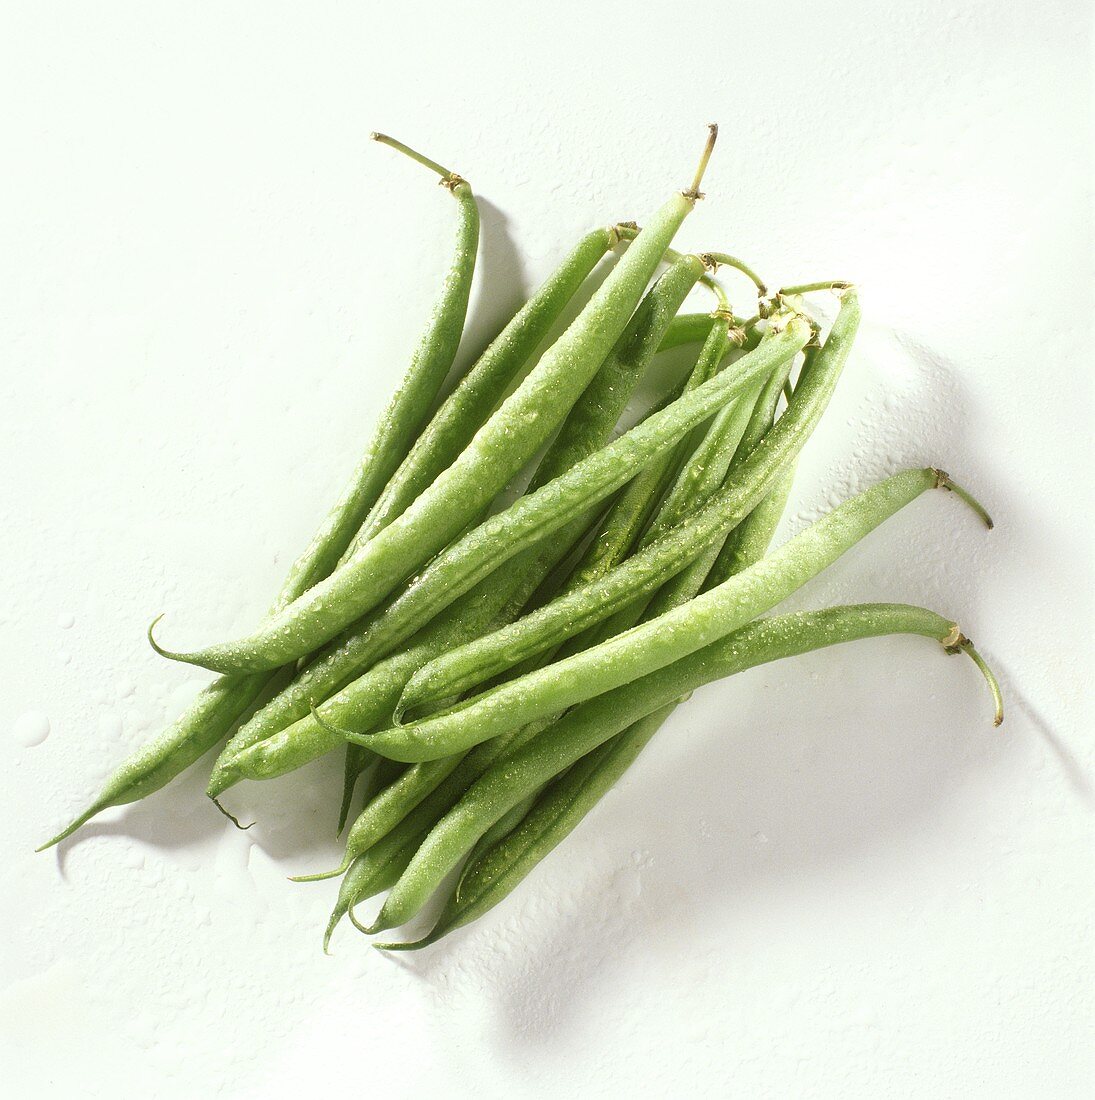 Green beans (French beans) with drops of water